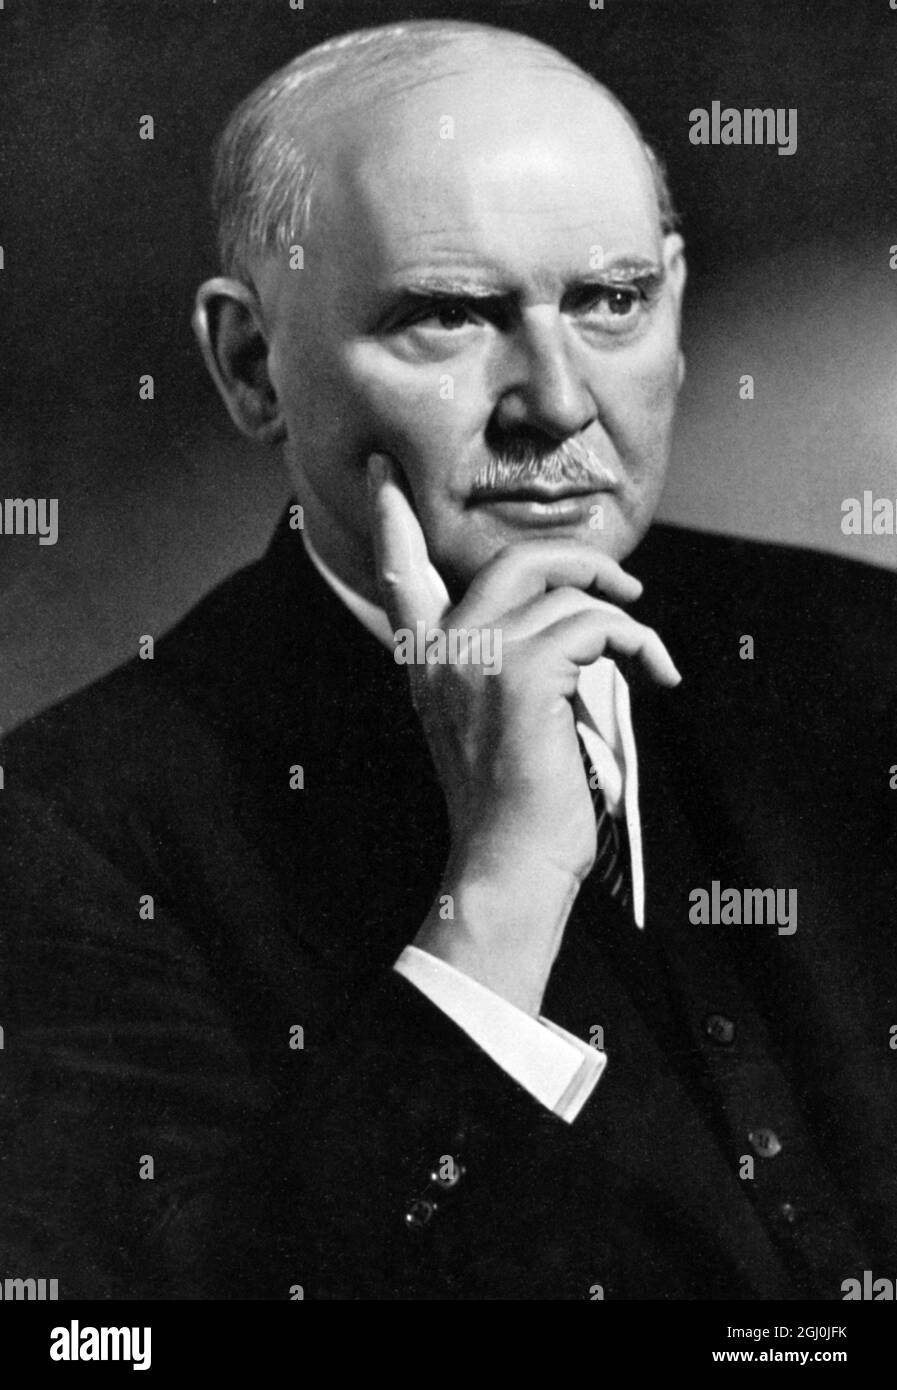 1936 Olympics, Berlin - Dr. Theodor Lewald, President of the German Organising Committee for the XI Olympics in Berlin 1936 ©TopFoto Stock Photo